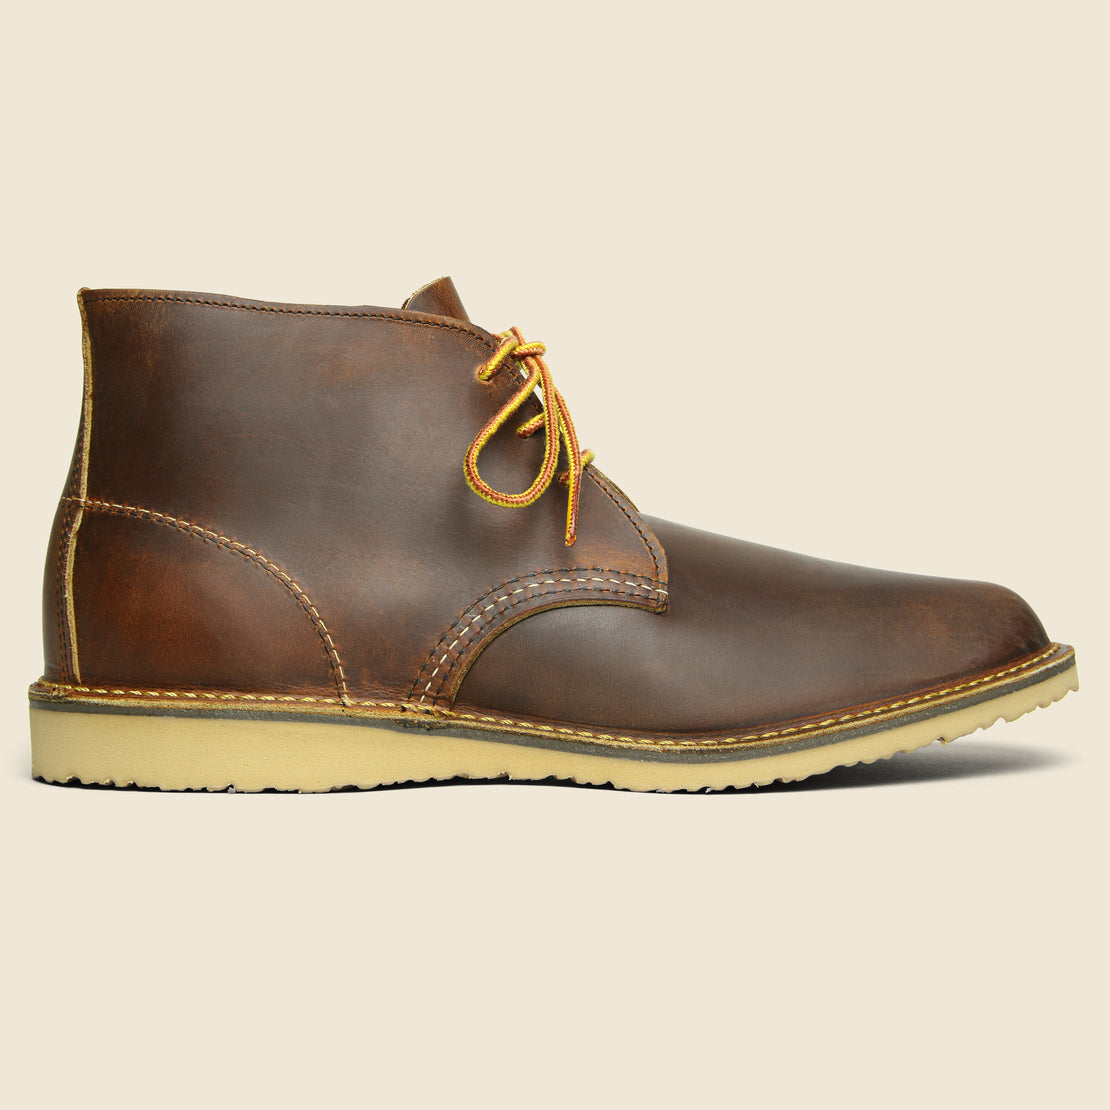 Red Wing Weekender Chukka No. 3322 - Copper Rough & Tough